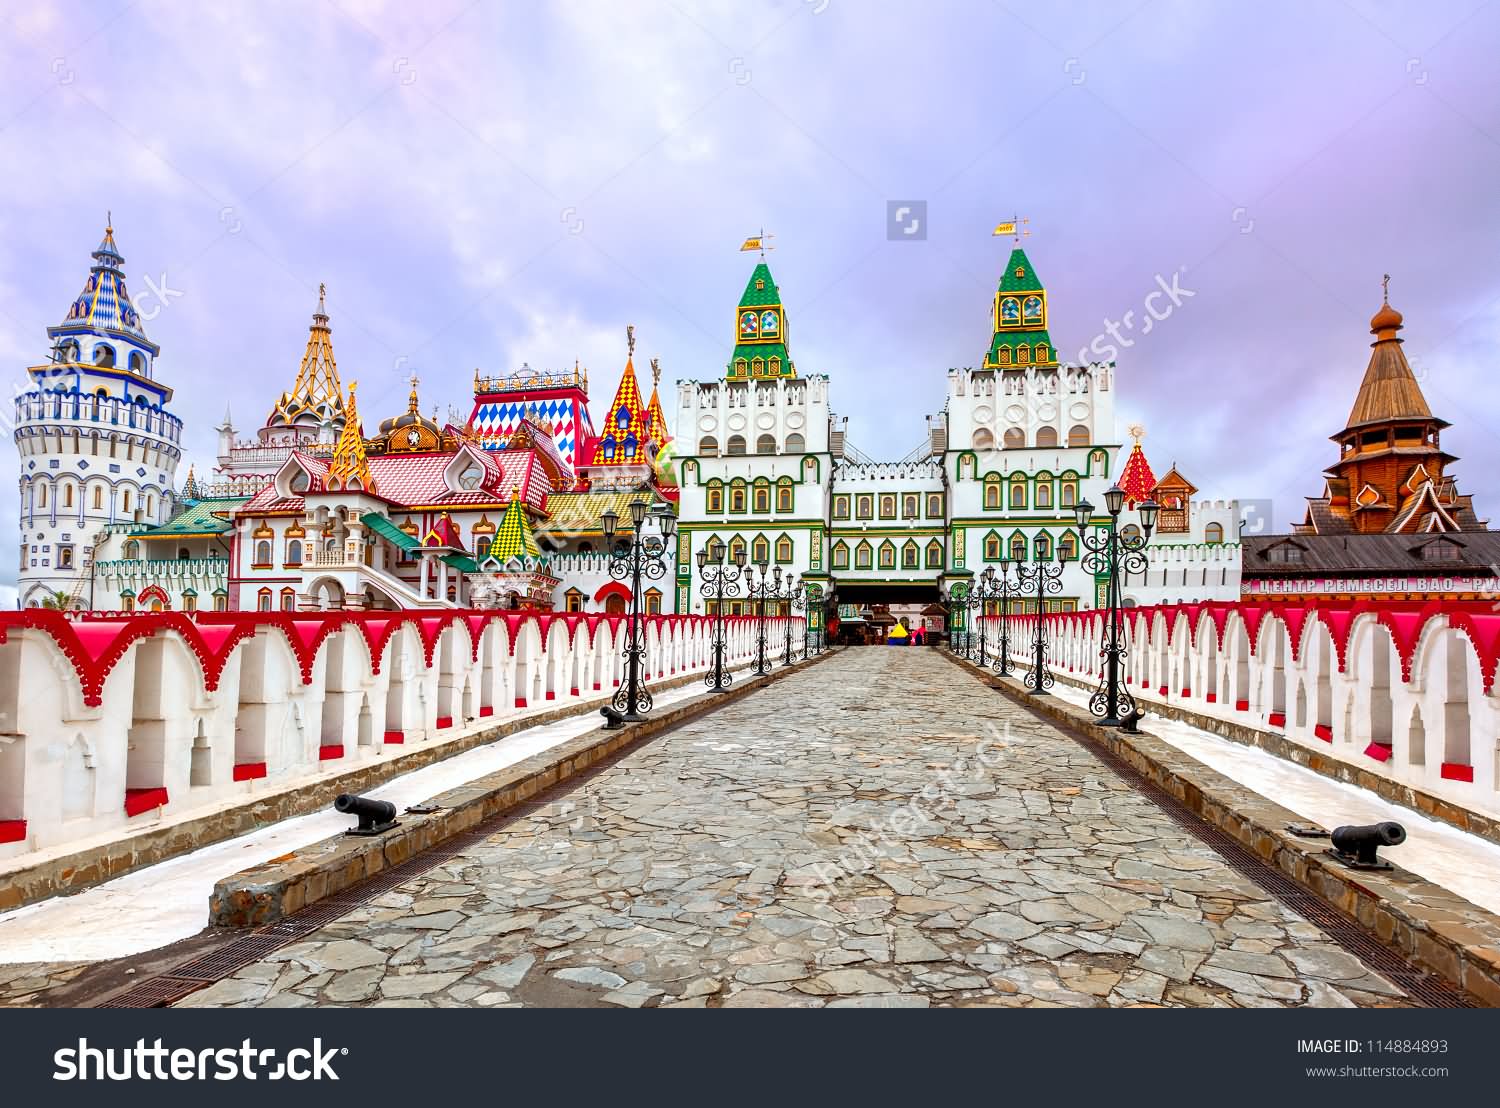 Bridge To The Kremlin Palace In Moscow